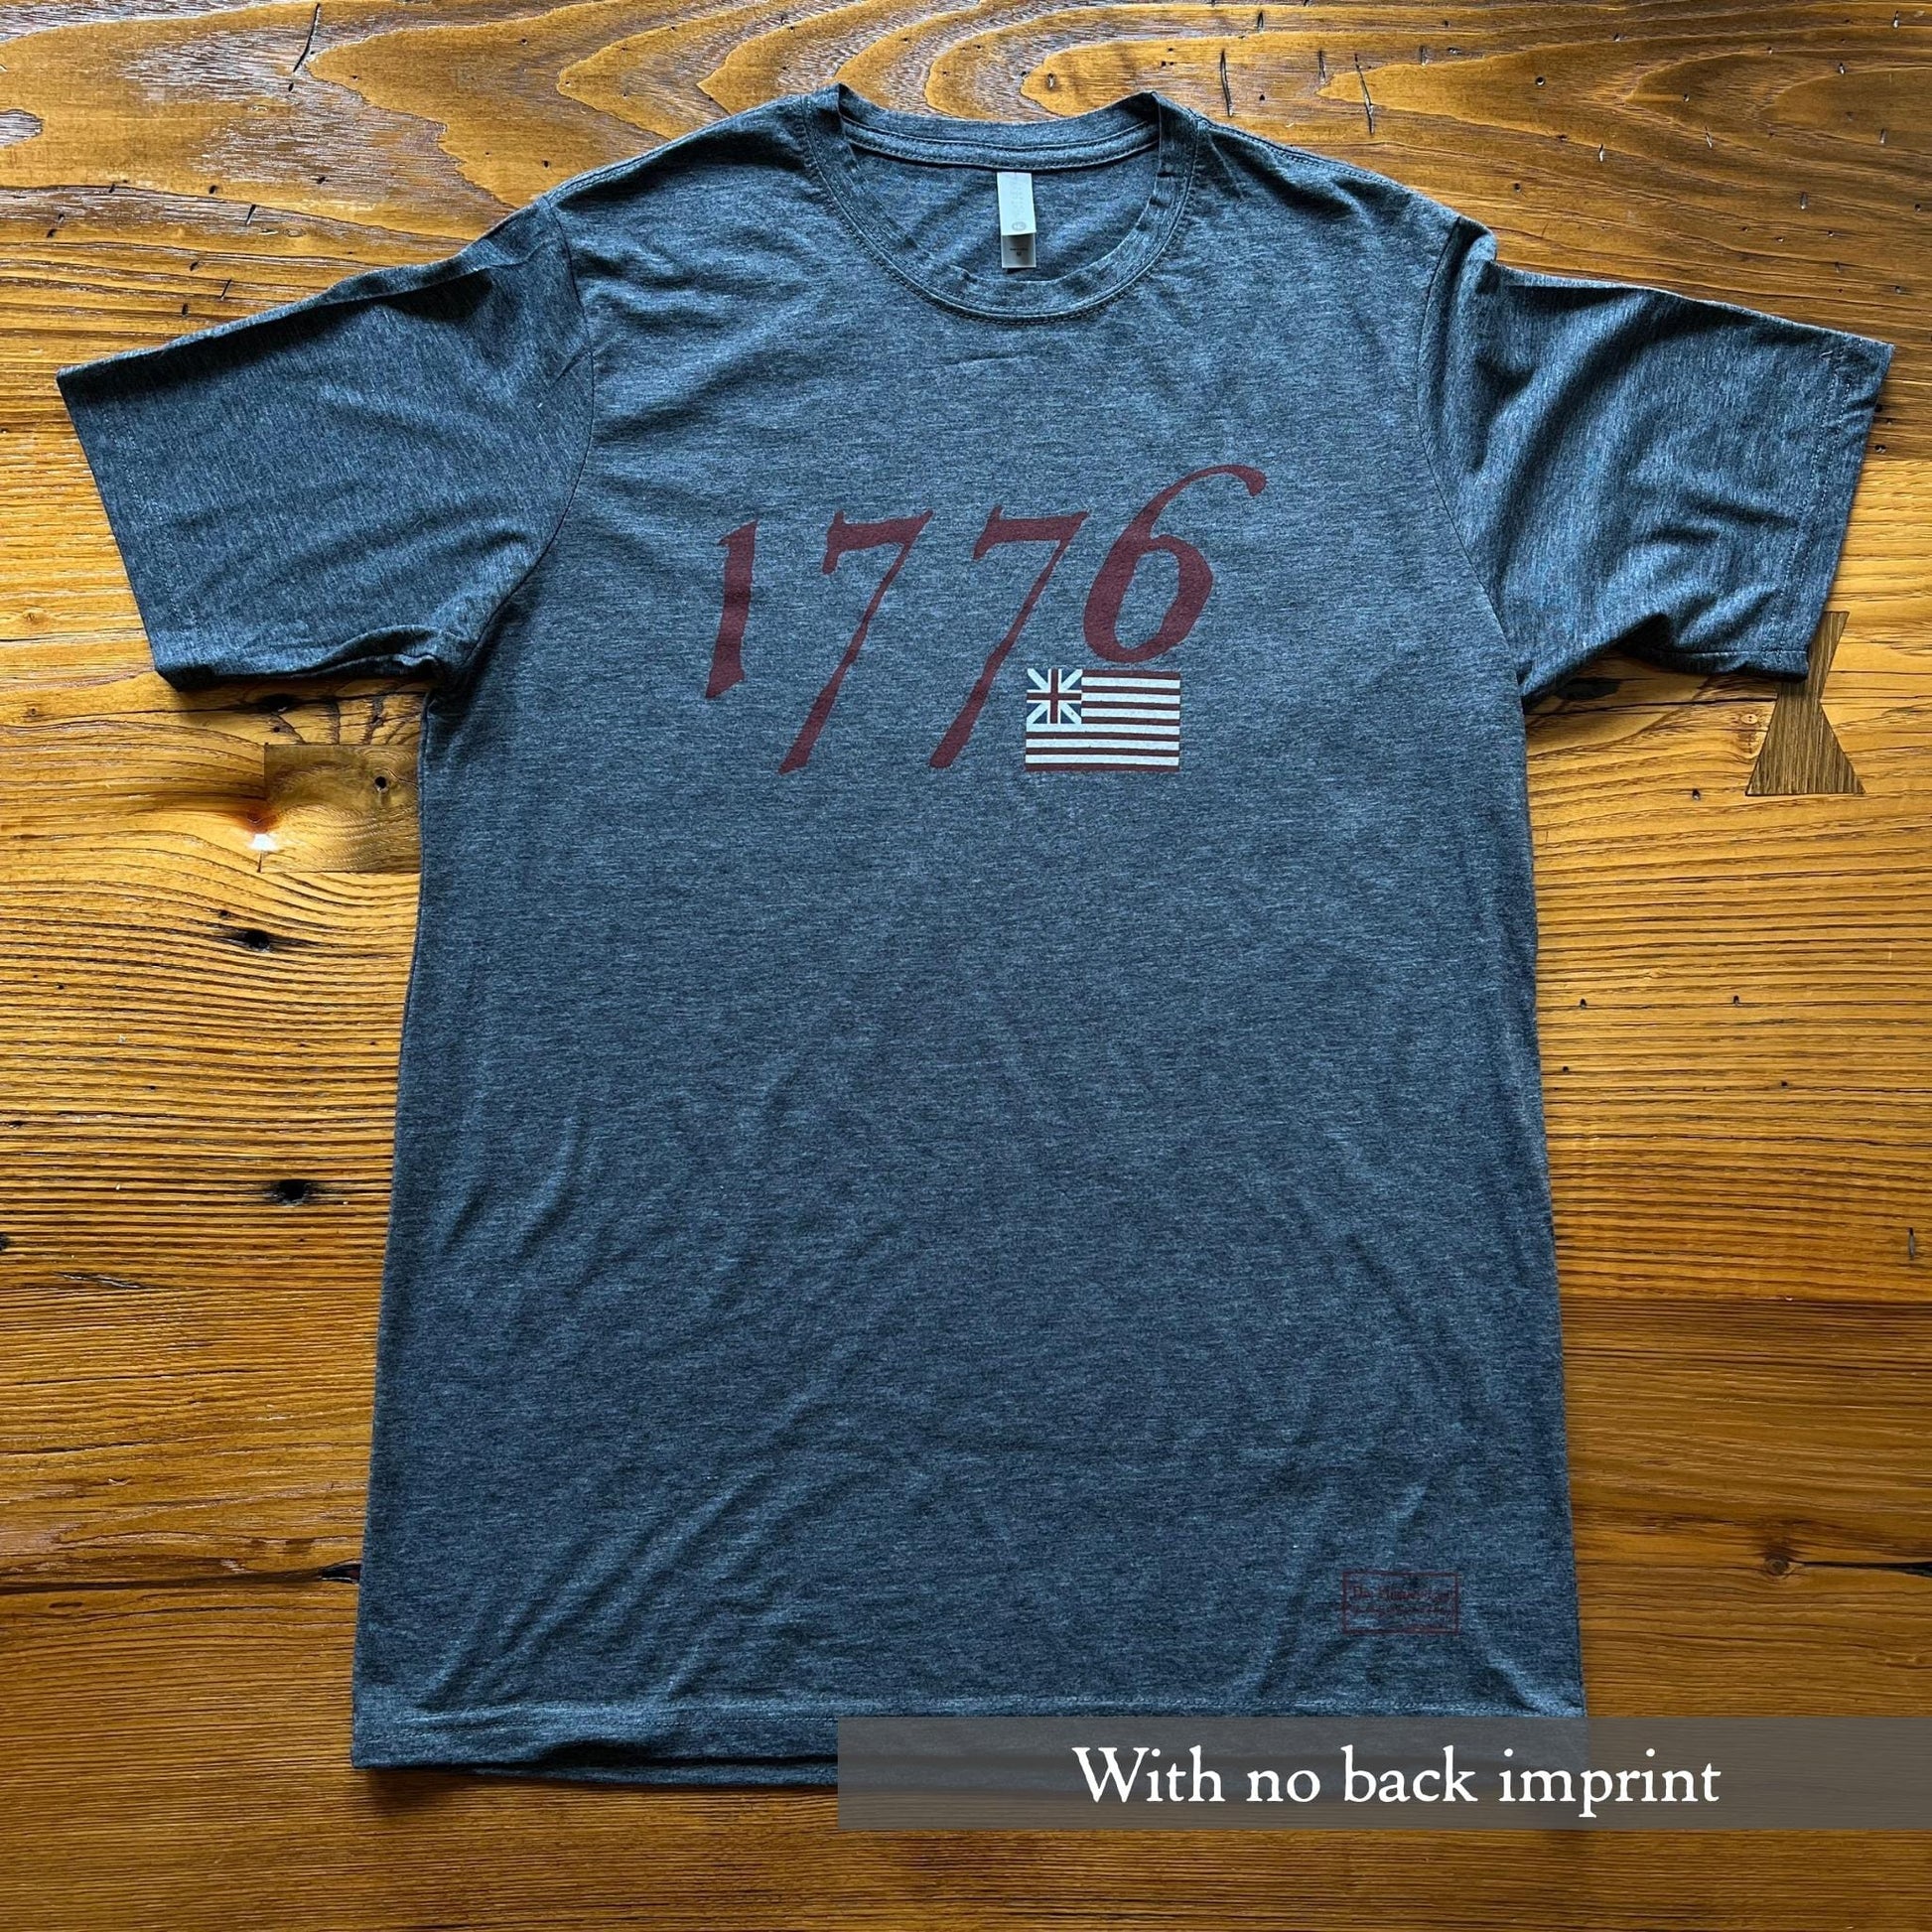 "1776 with Our Nation's First Flag" Shirt - Antique denim from The History List store with no back imprint